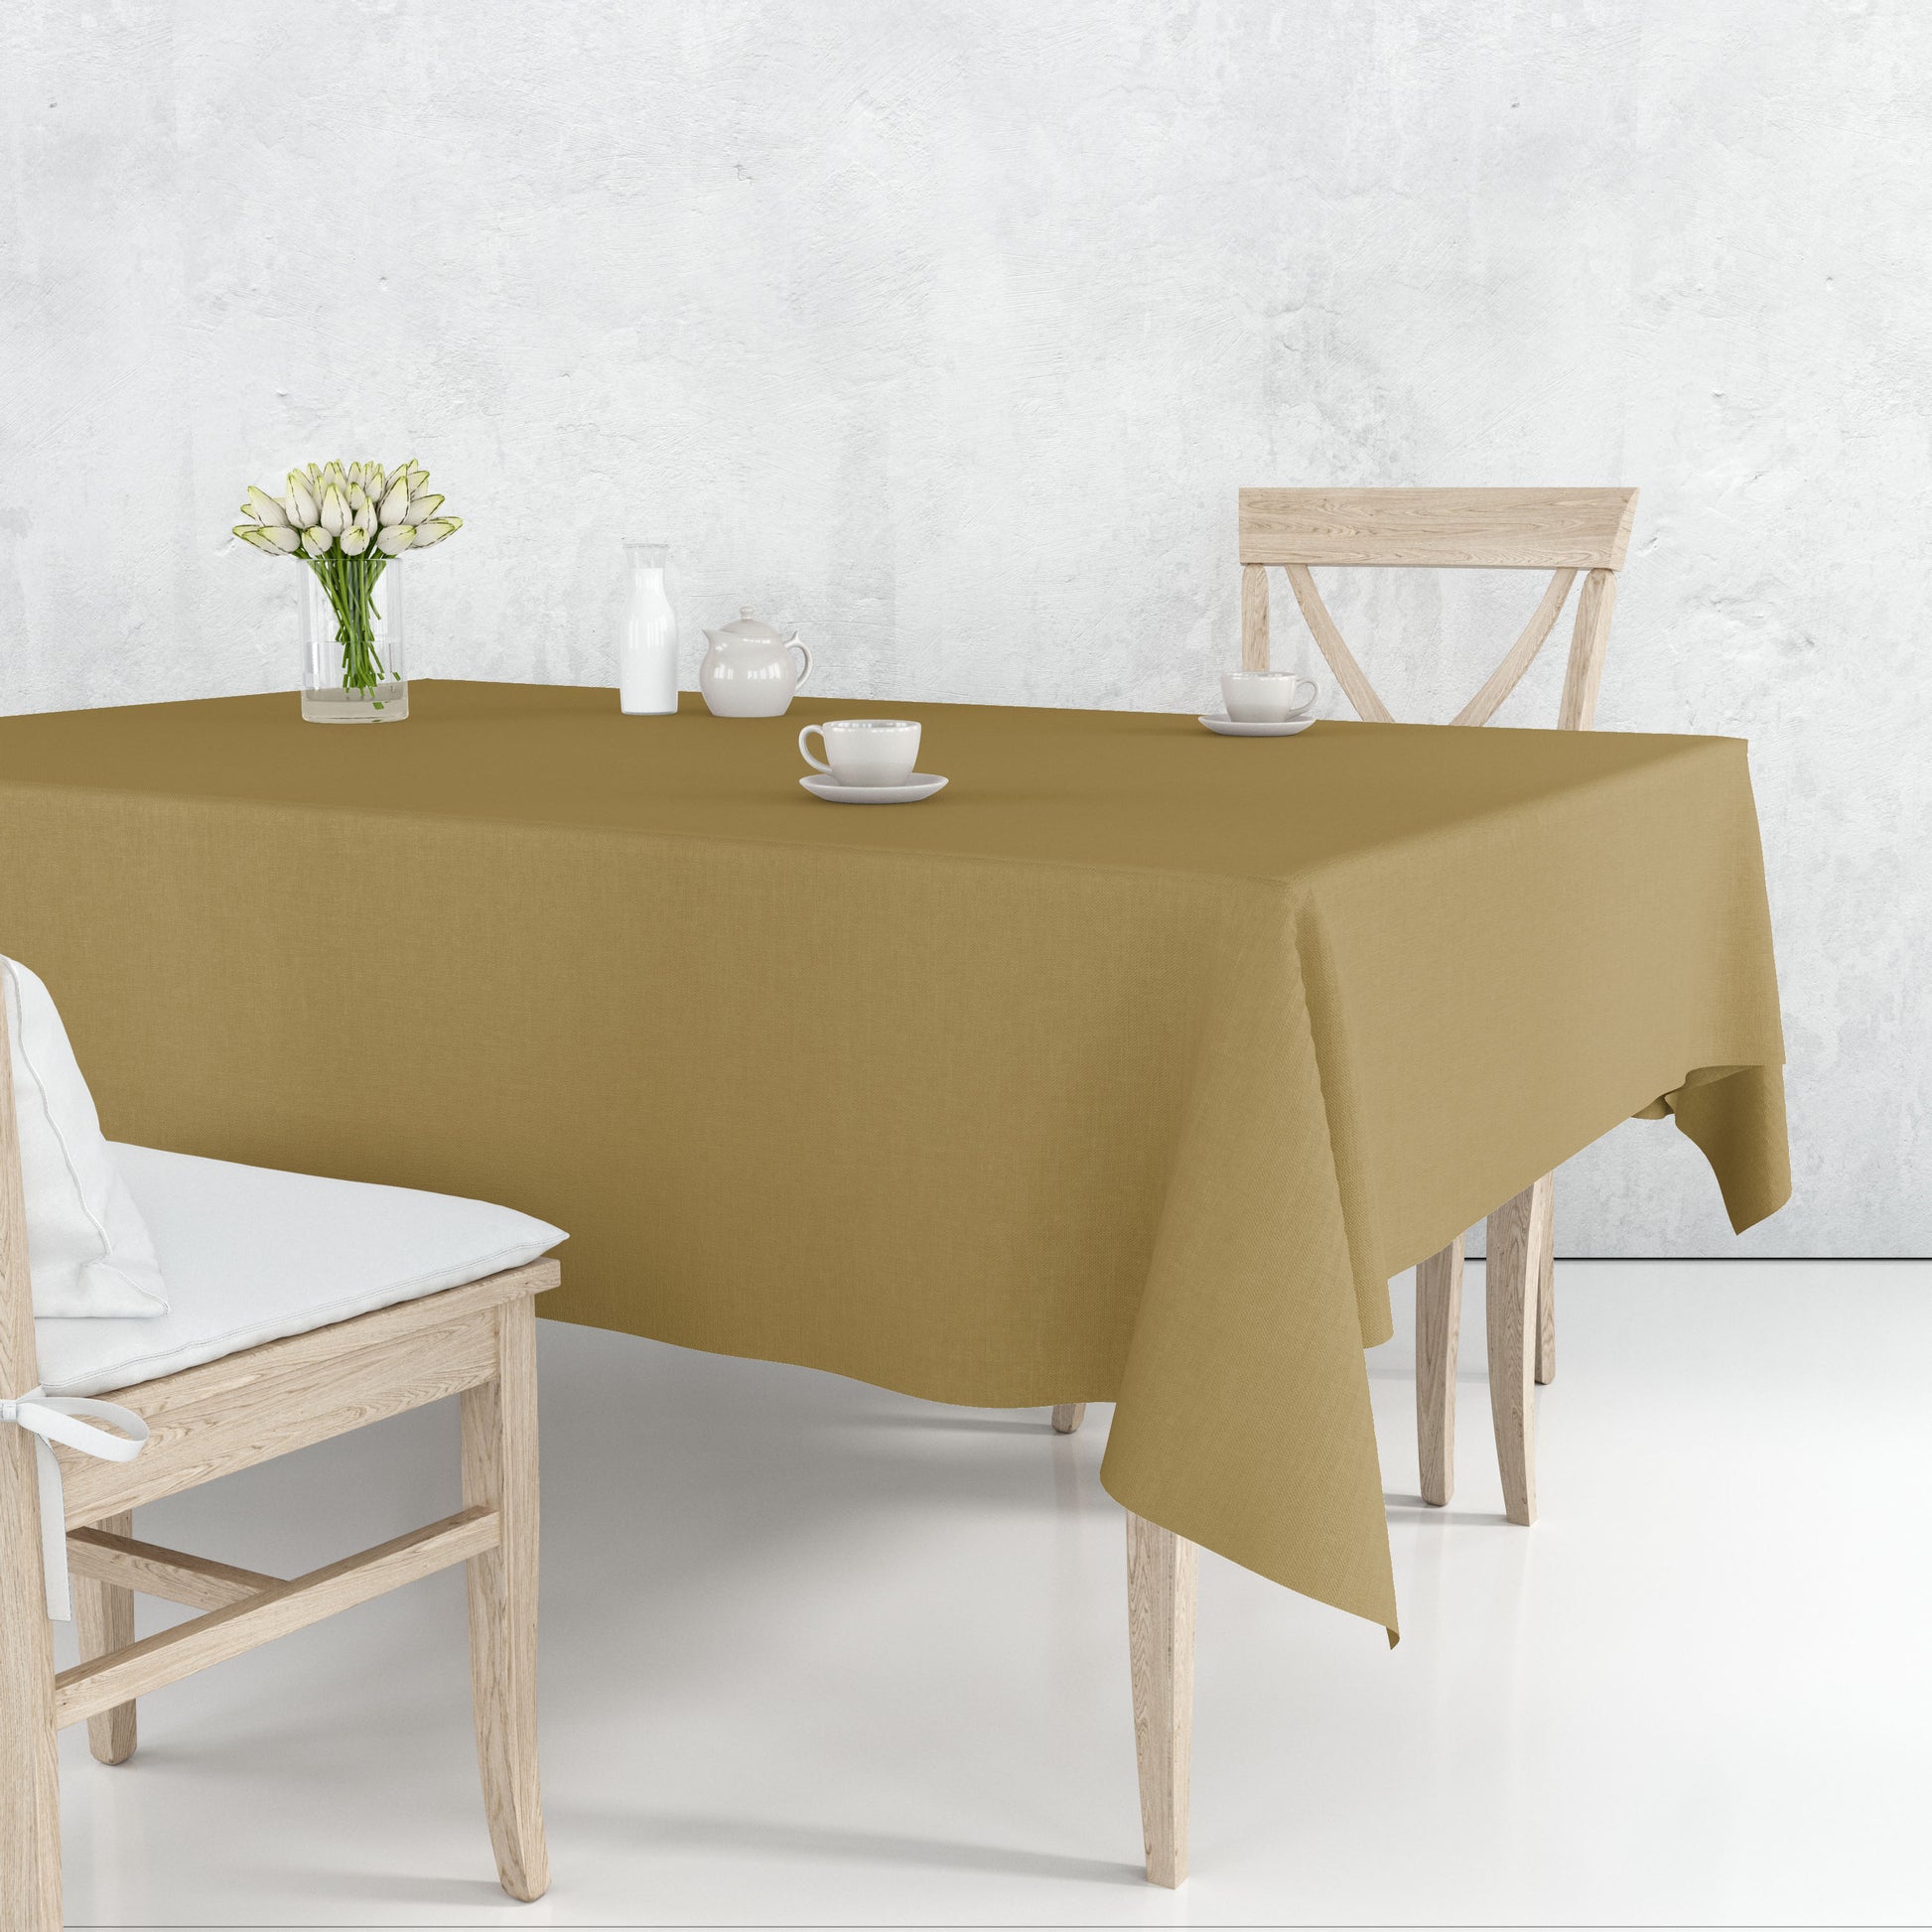 Tablecover Plastic Gold Rectangular  54'' X 108'' Tablesettings Party Dimensions   